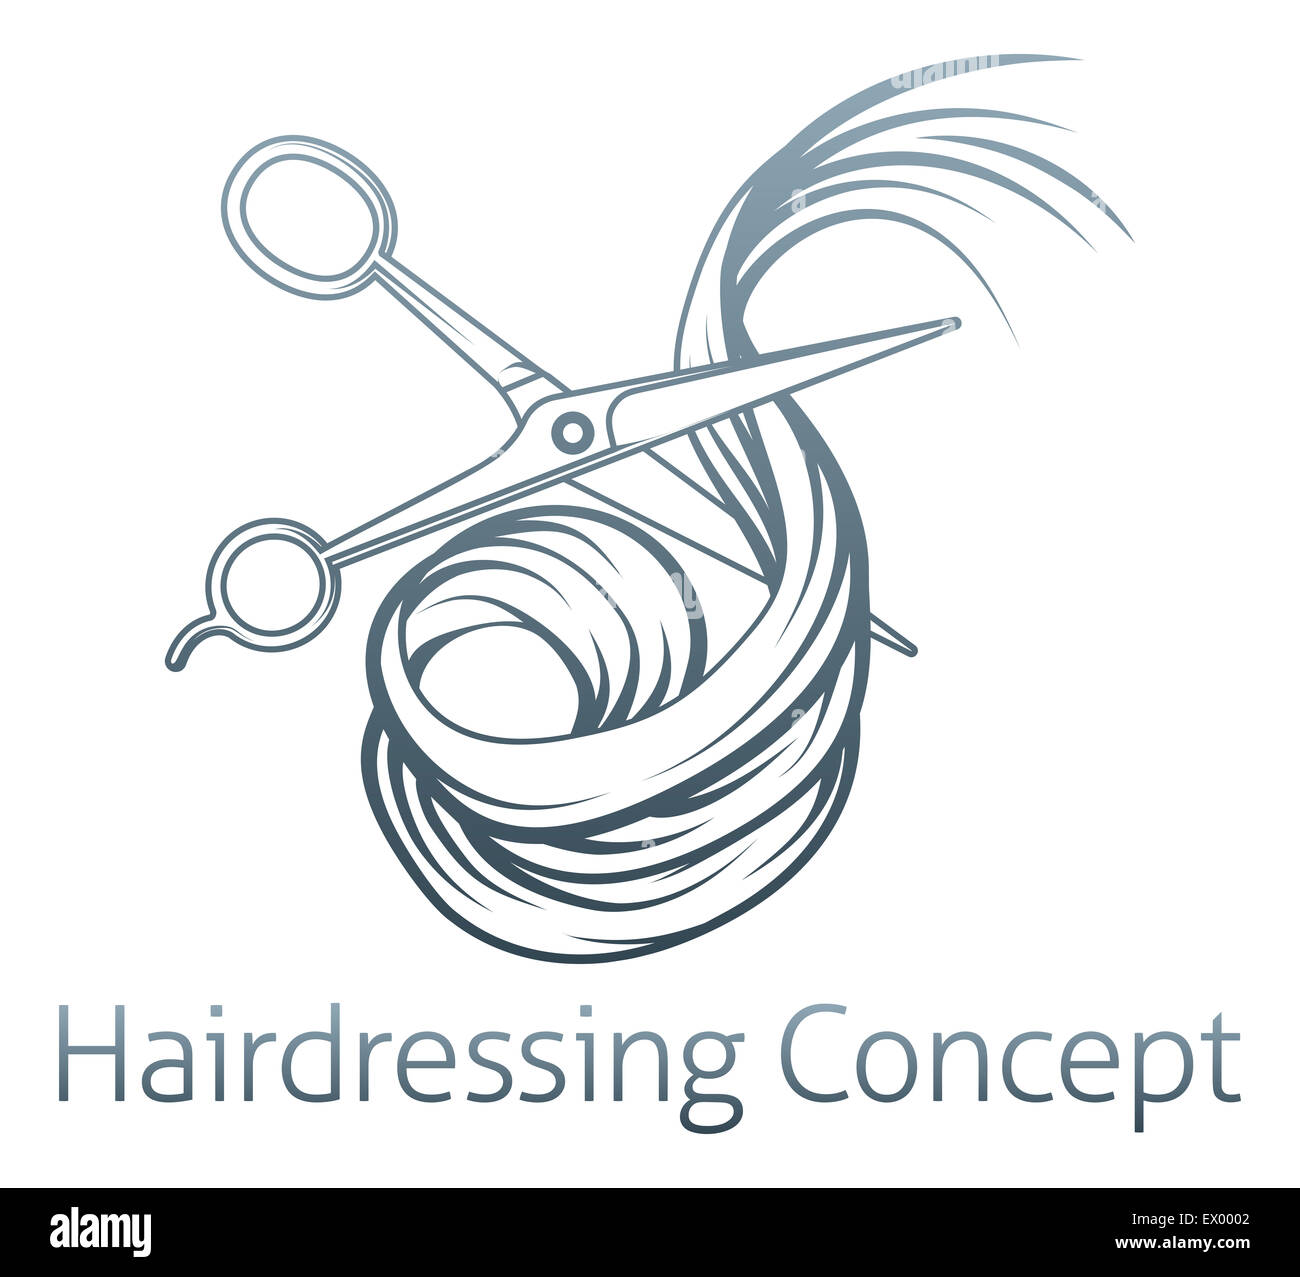 An illustration of a pair of hairdressers scissors cutting Hair Stock Photo